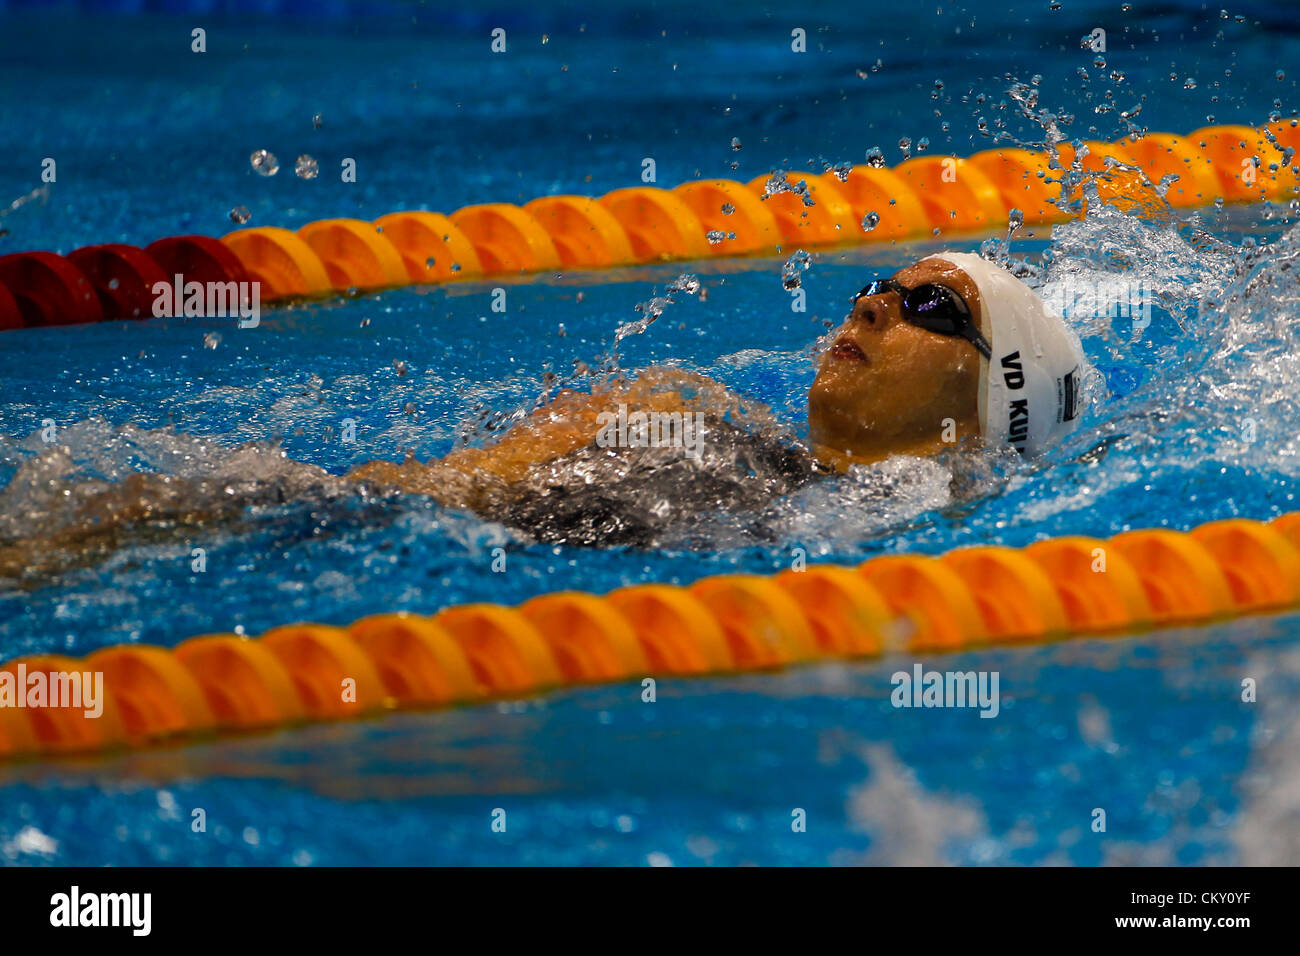 31.08.2012 London, England. Marloiu VAN DER KLUCK in action during the women's 100m backstroke S14 on Day 2 of the Paralympic Swimming from the Aquatics Centre. Stock Photo